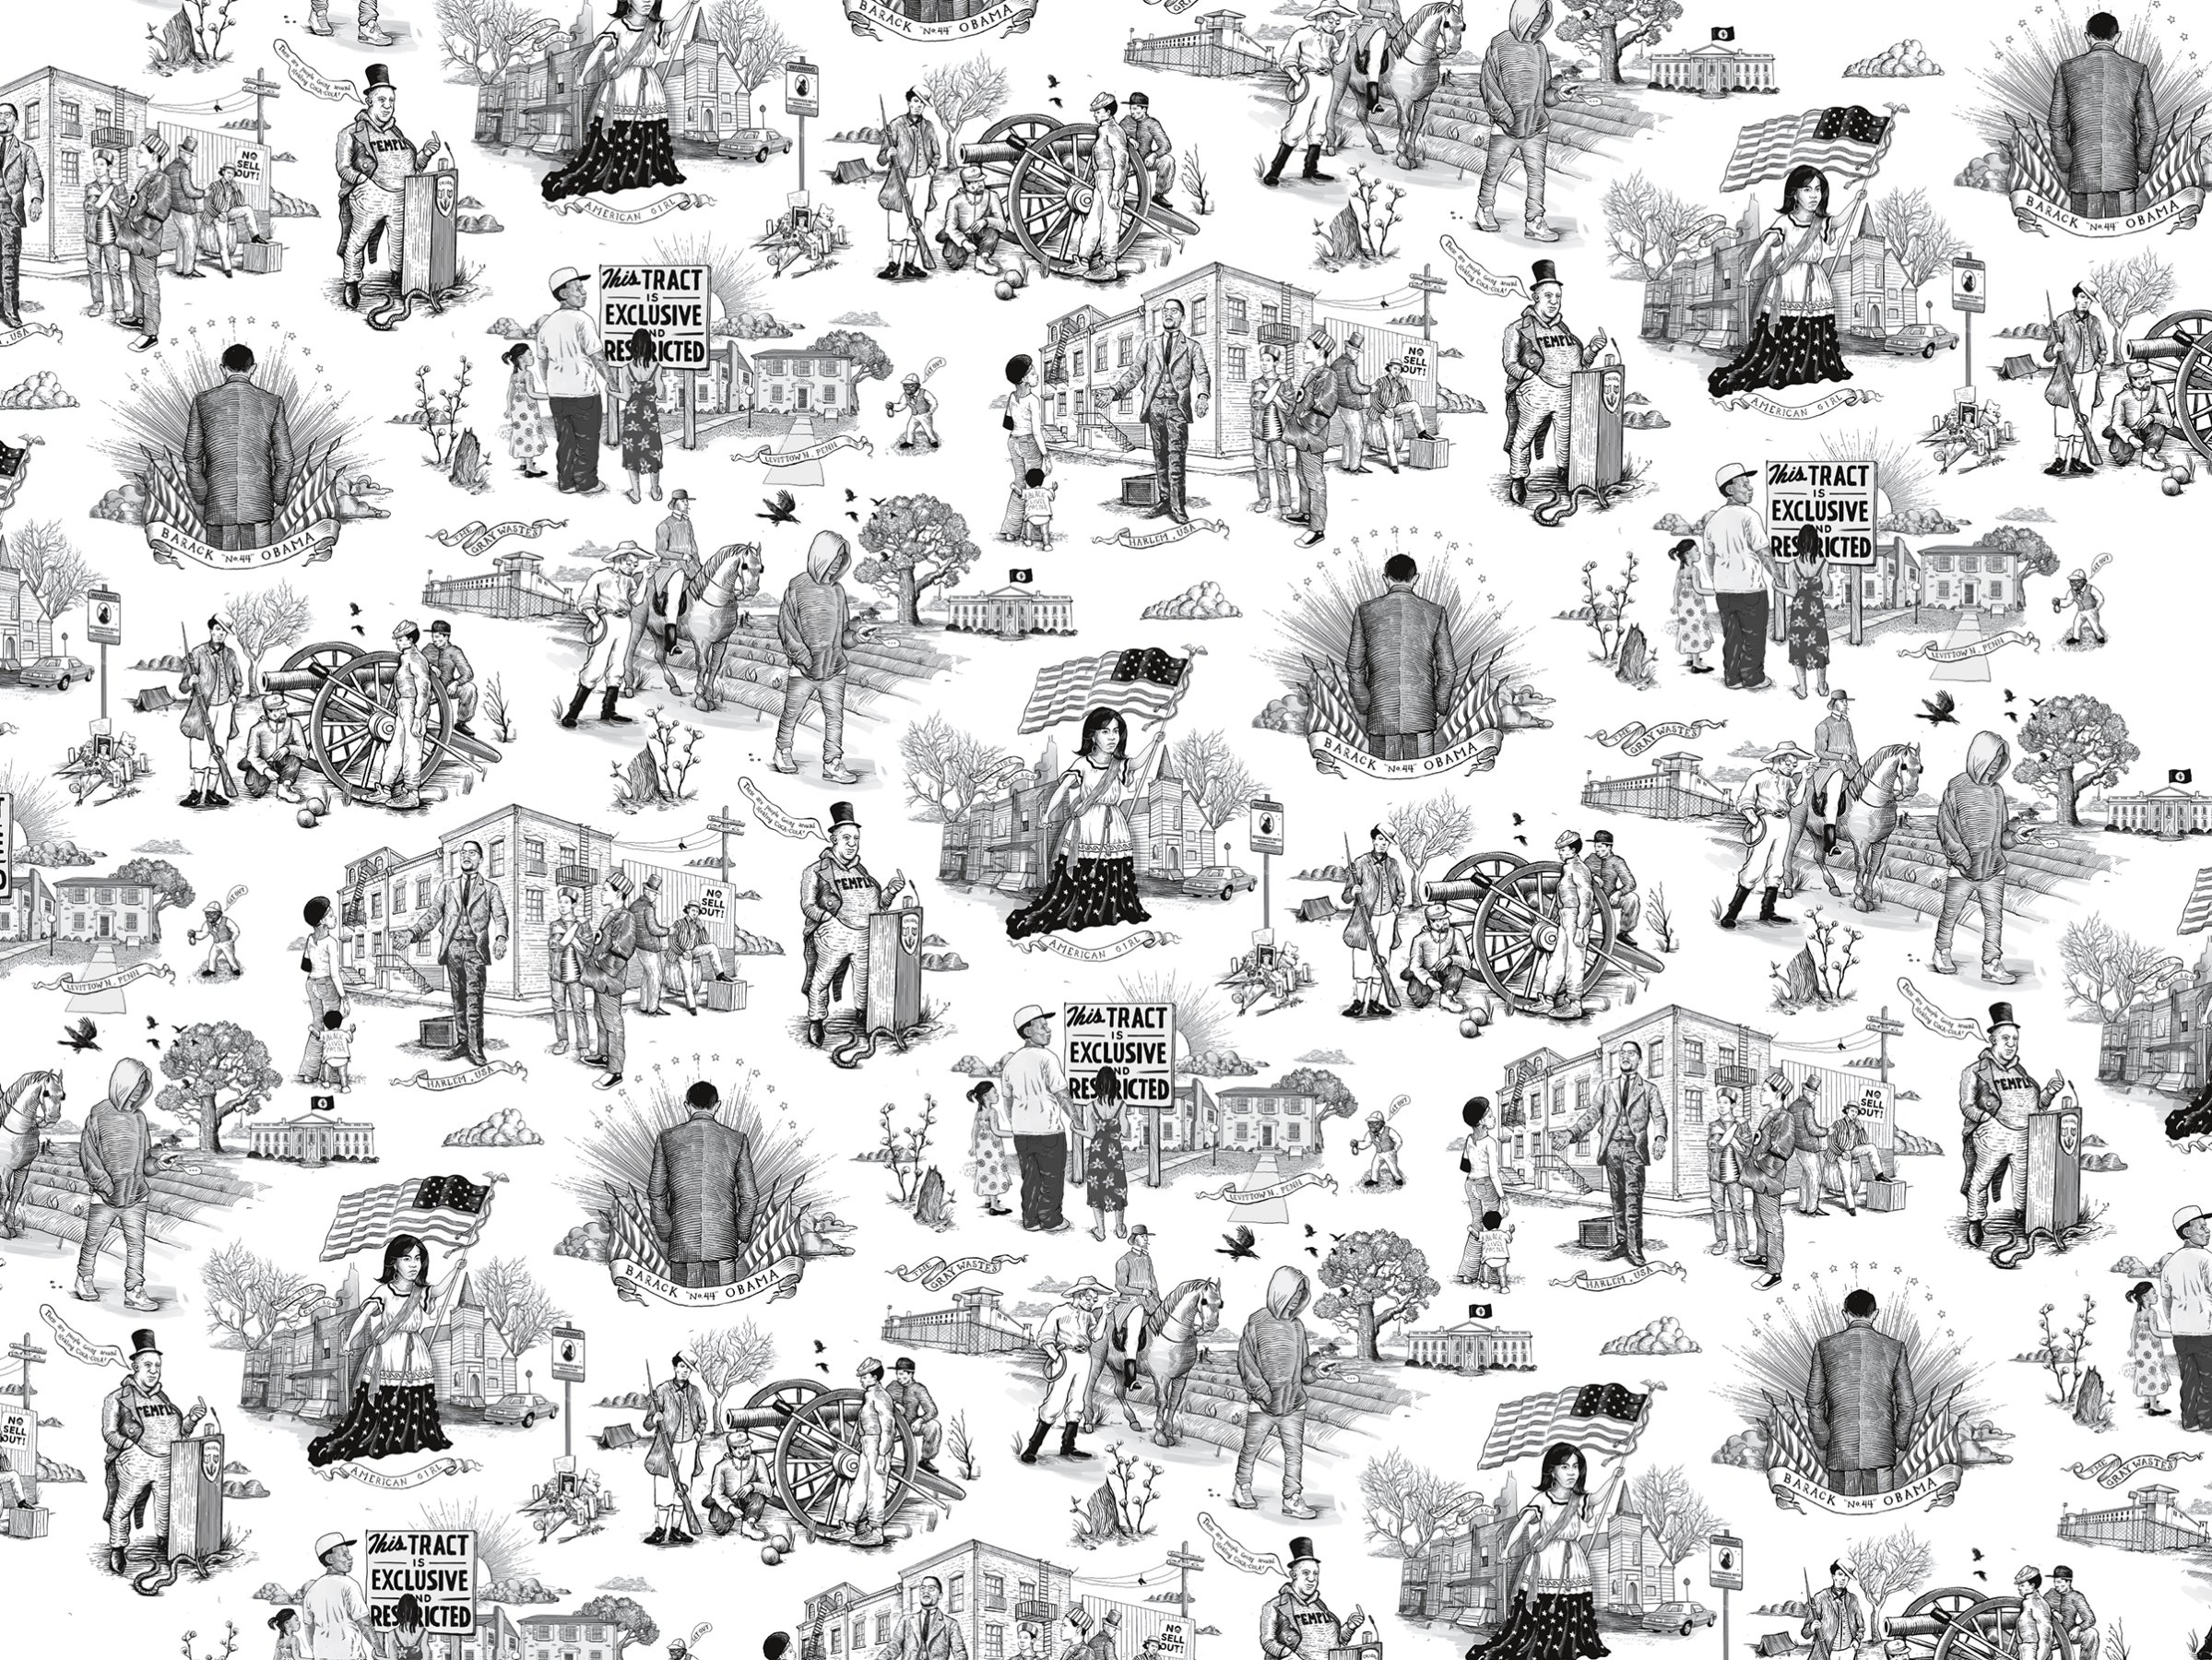 Illustrations on the book’s endpapers represent each of Coates’ essays